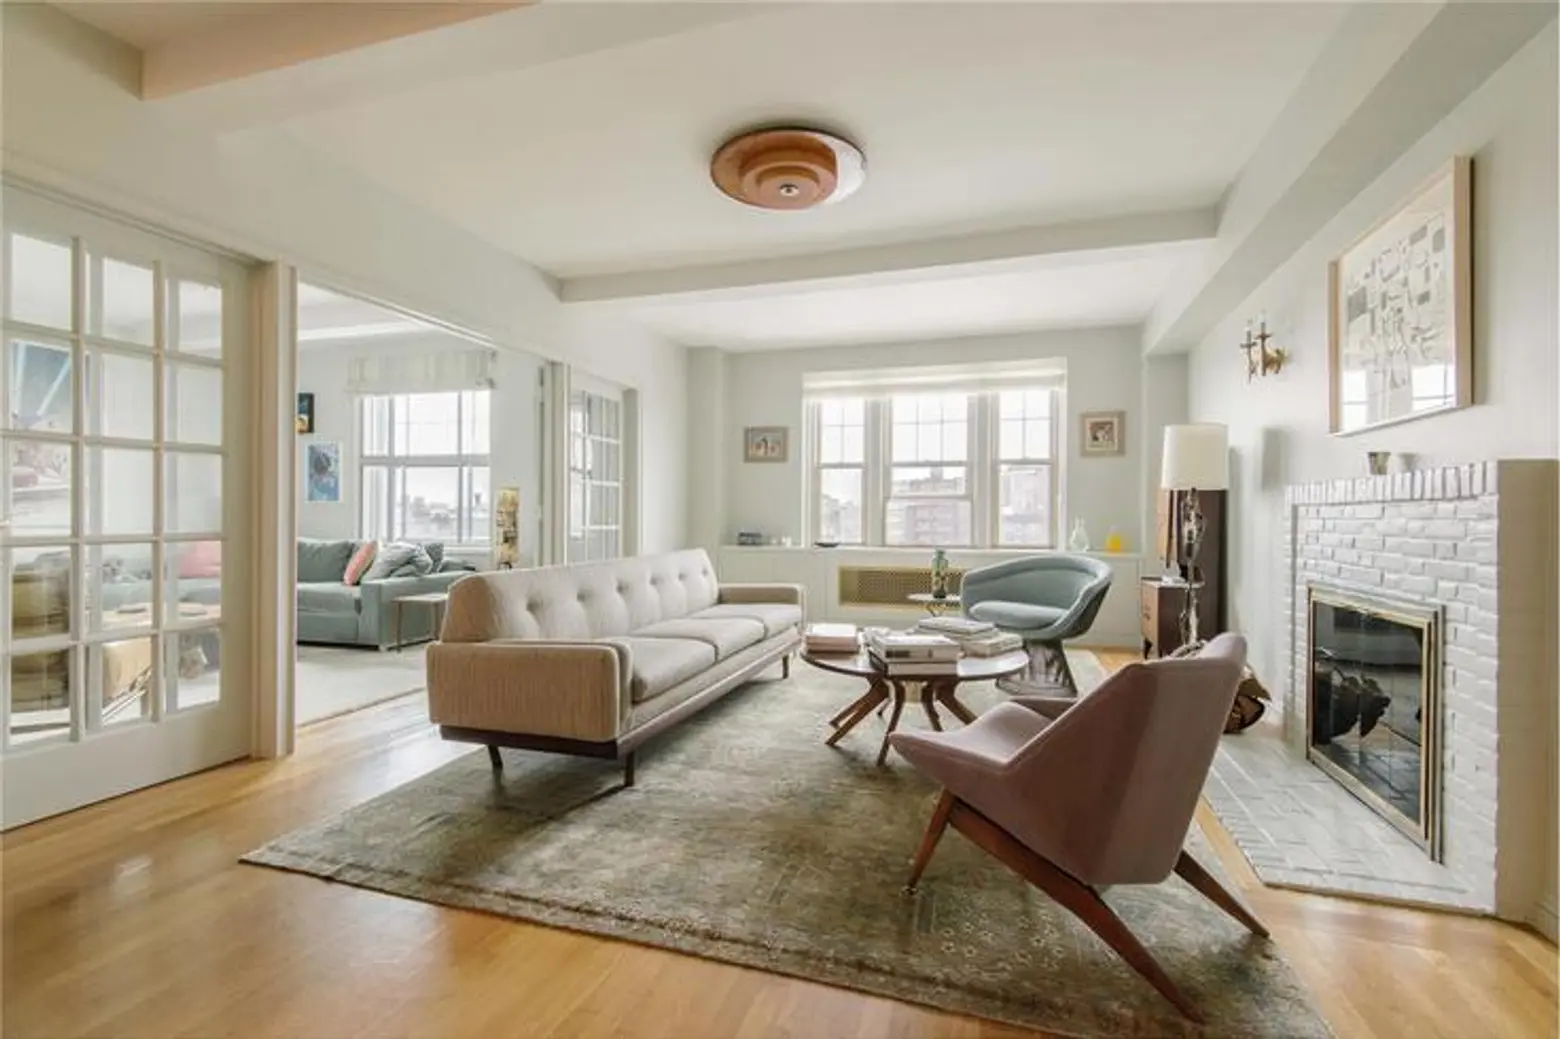 West Village Rental in Renowned Bing & Bing Condominium Offers a Lot of Bang for the Buck